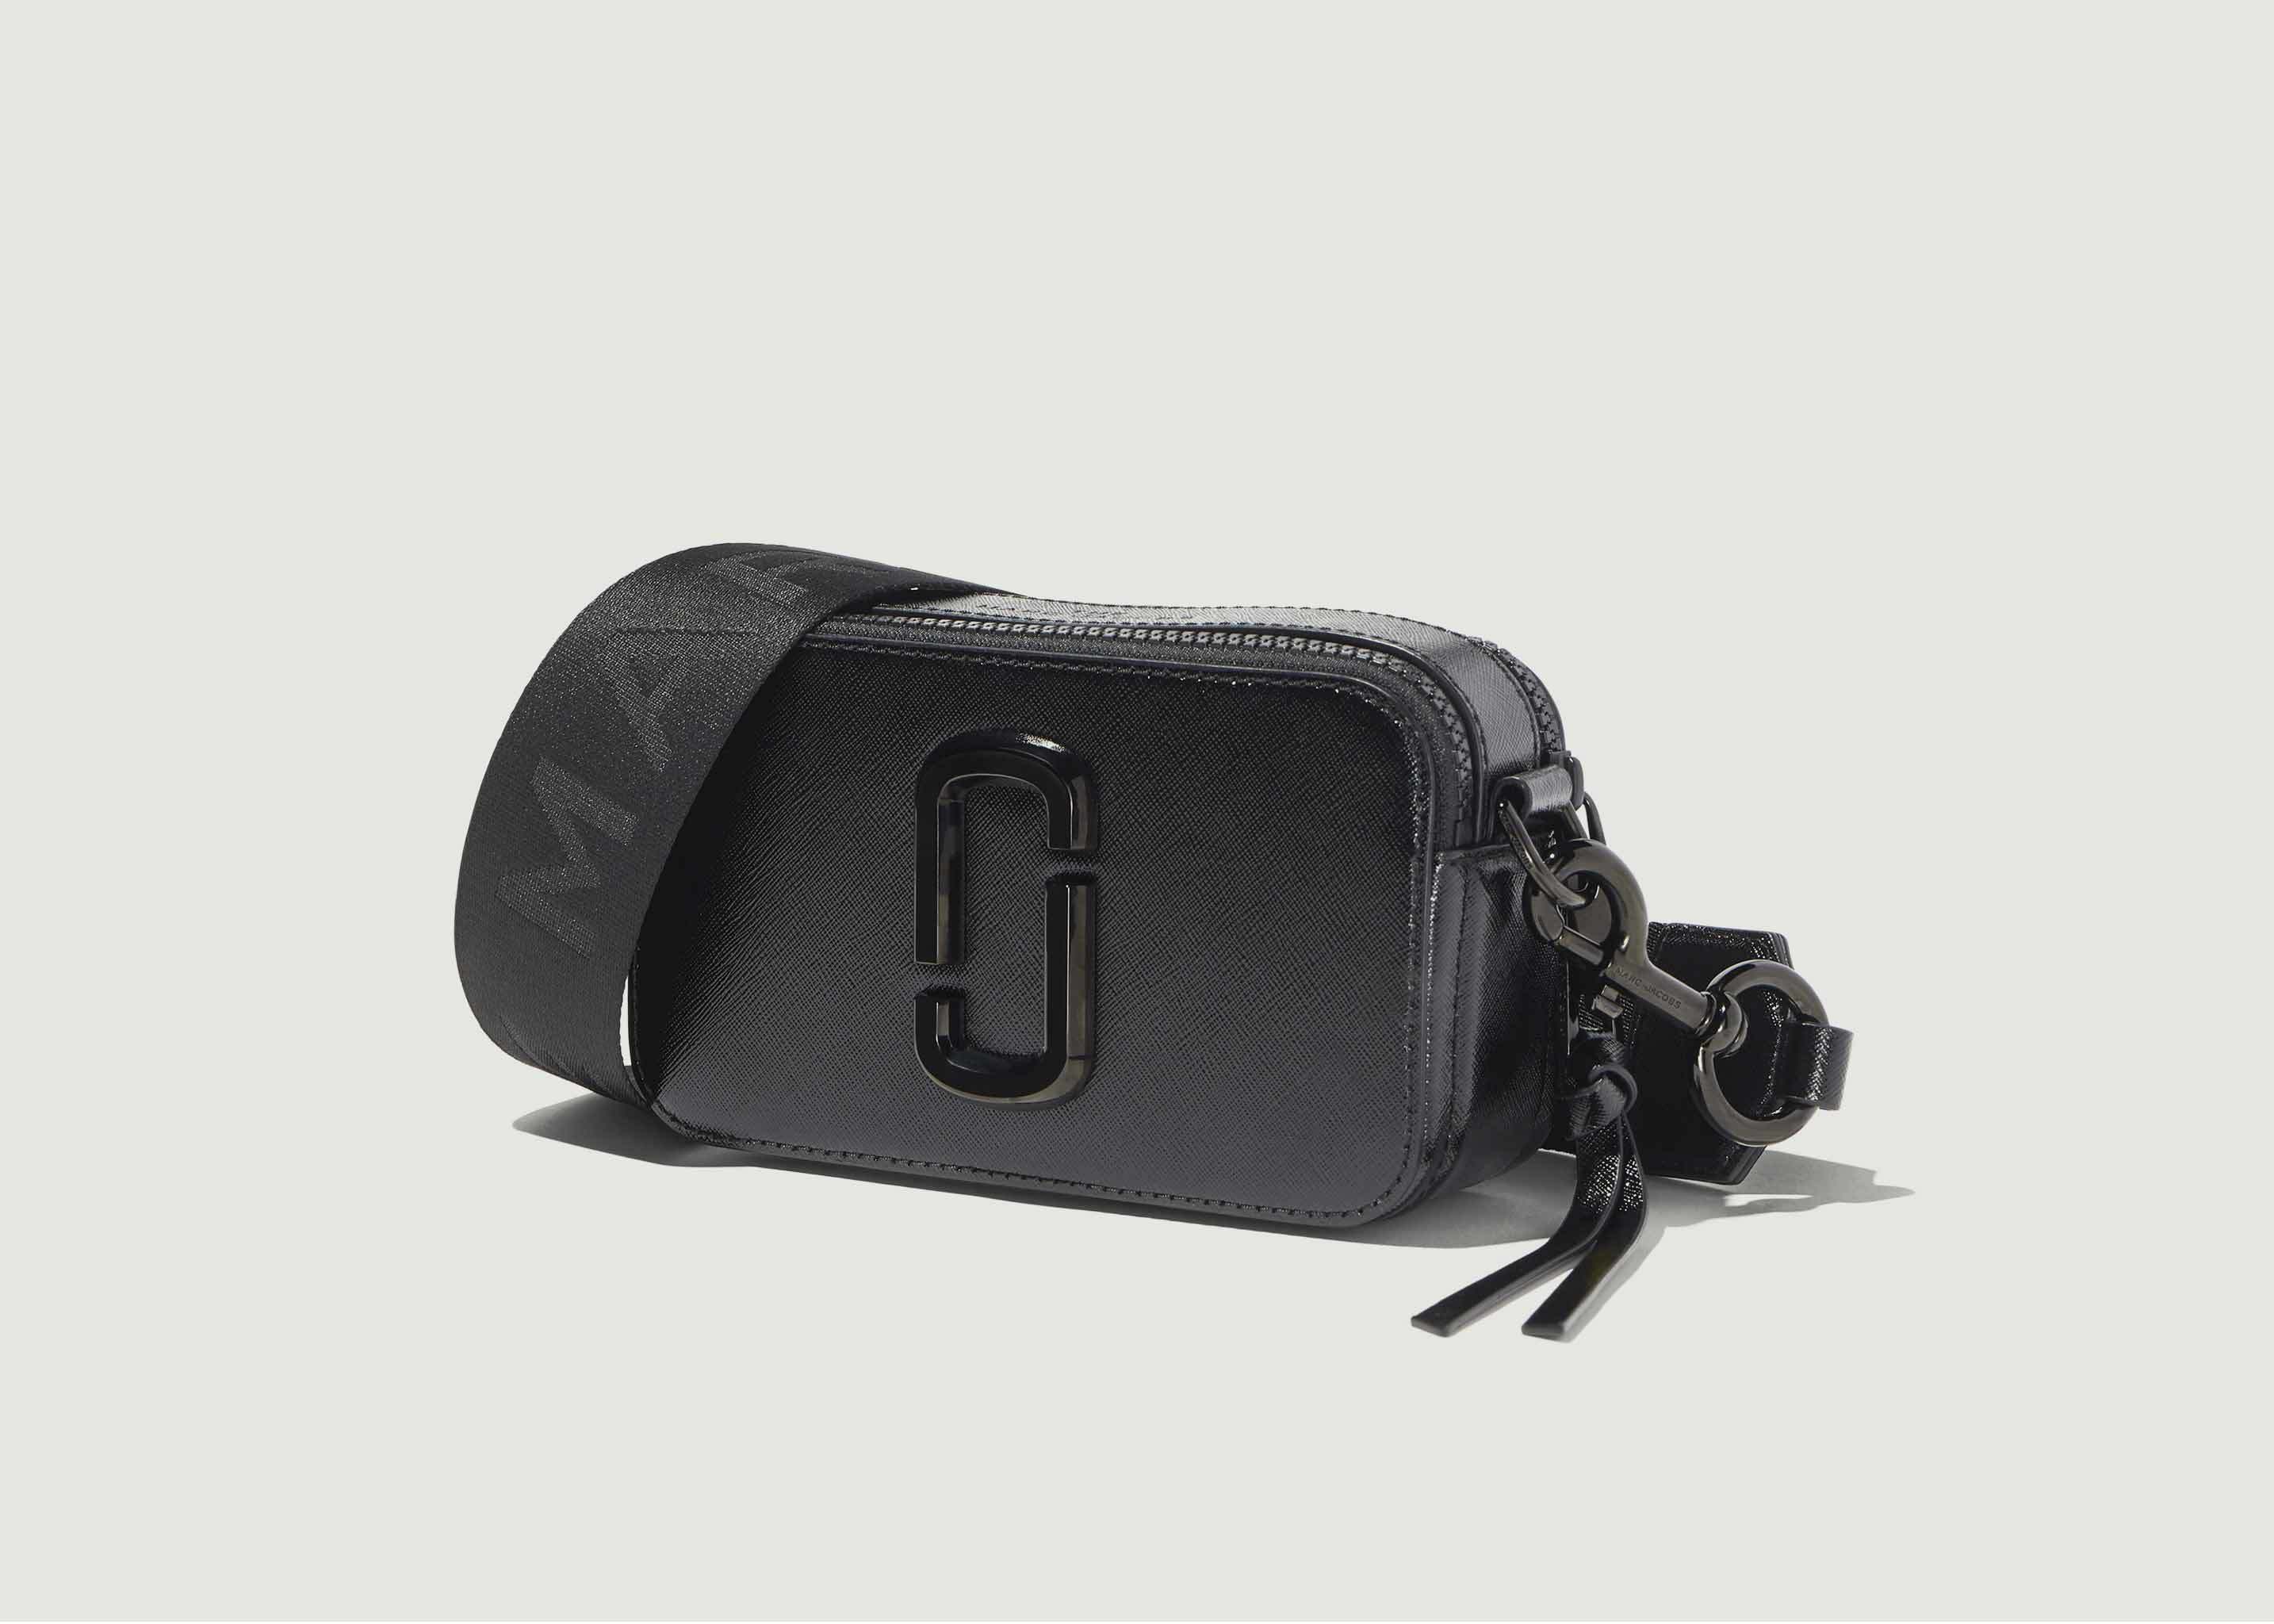 Marc jacobs sacoche homme - Cdiscount